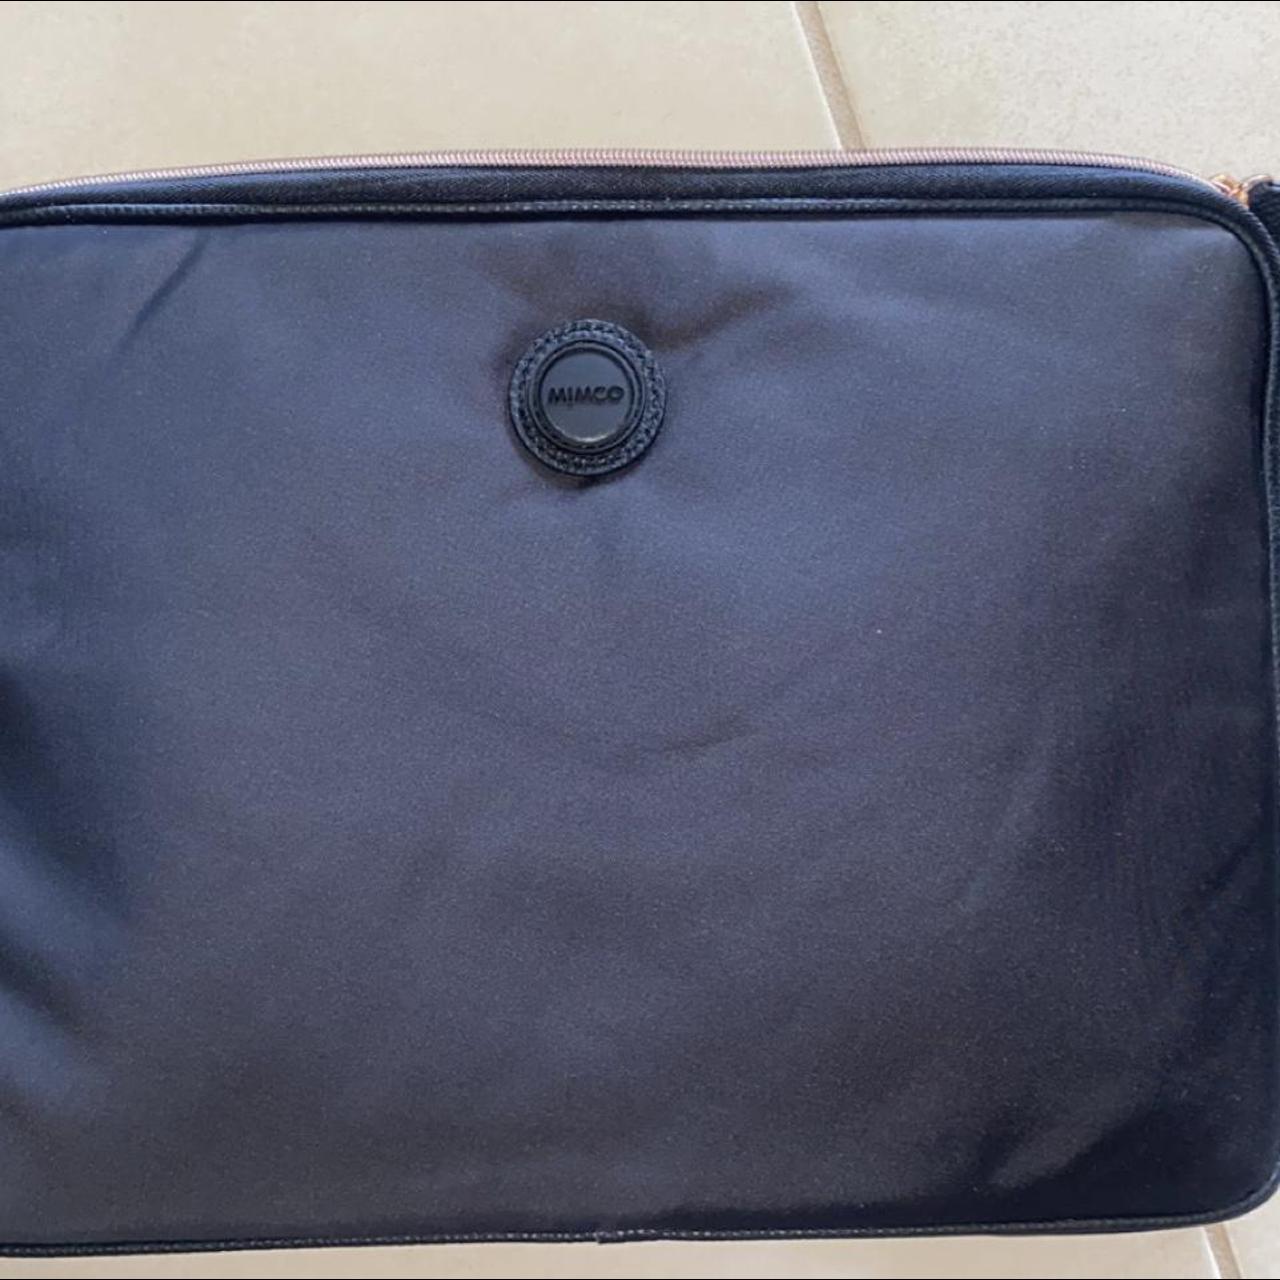 Mimco laptop case brand new never used rrp $100 #mimco - Depop